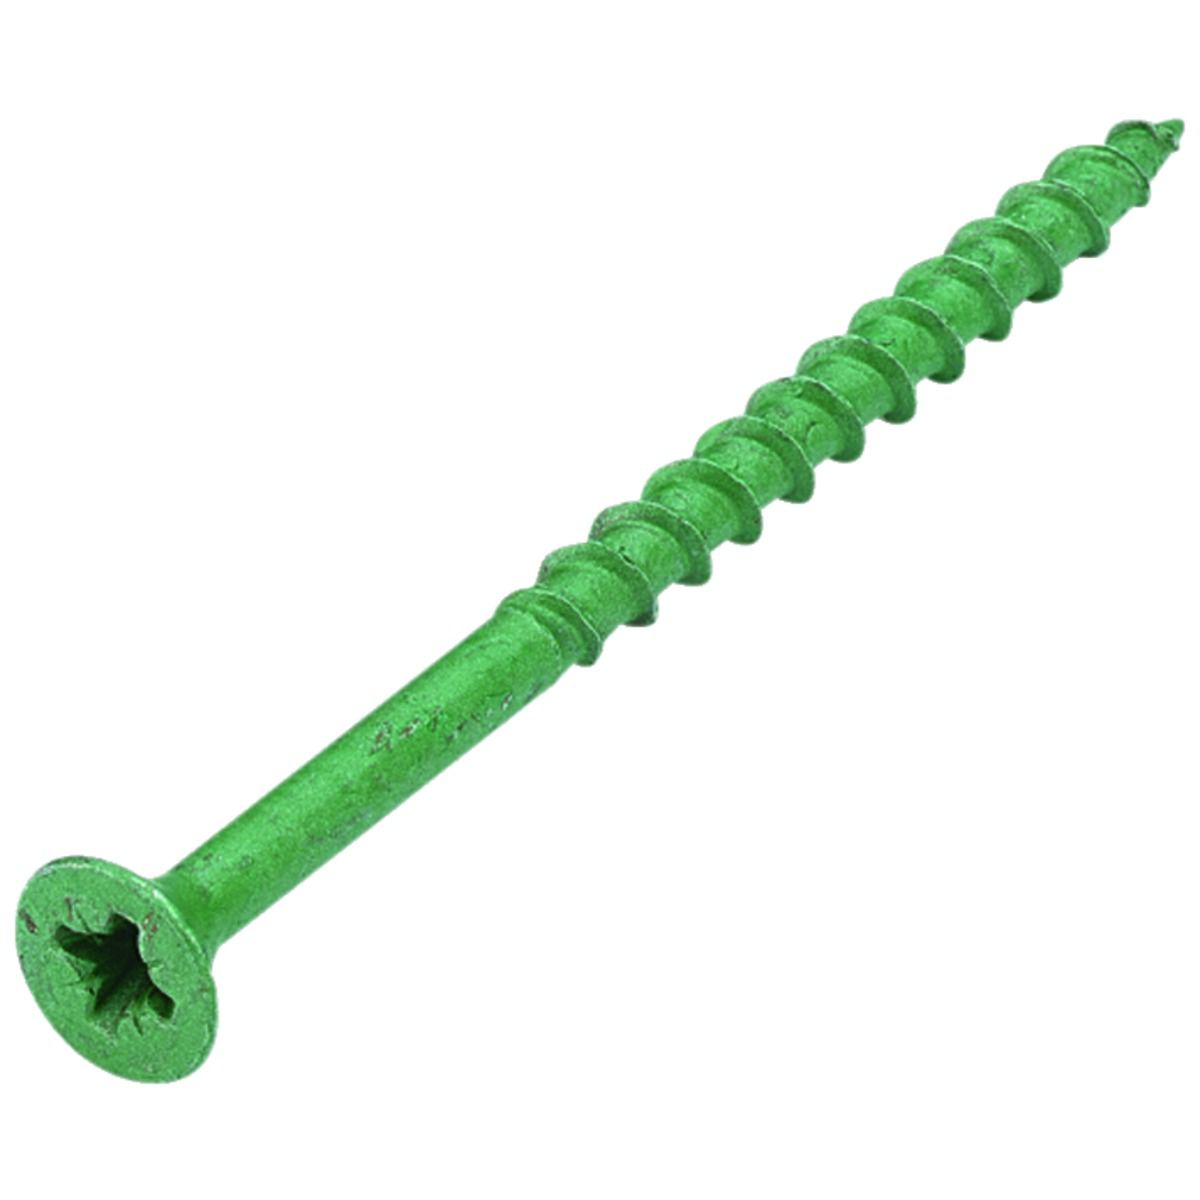 Image of Wickes External Grade Screw - Green No 10 x 64mm Pack of 20